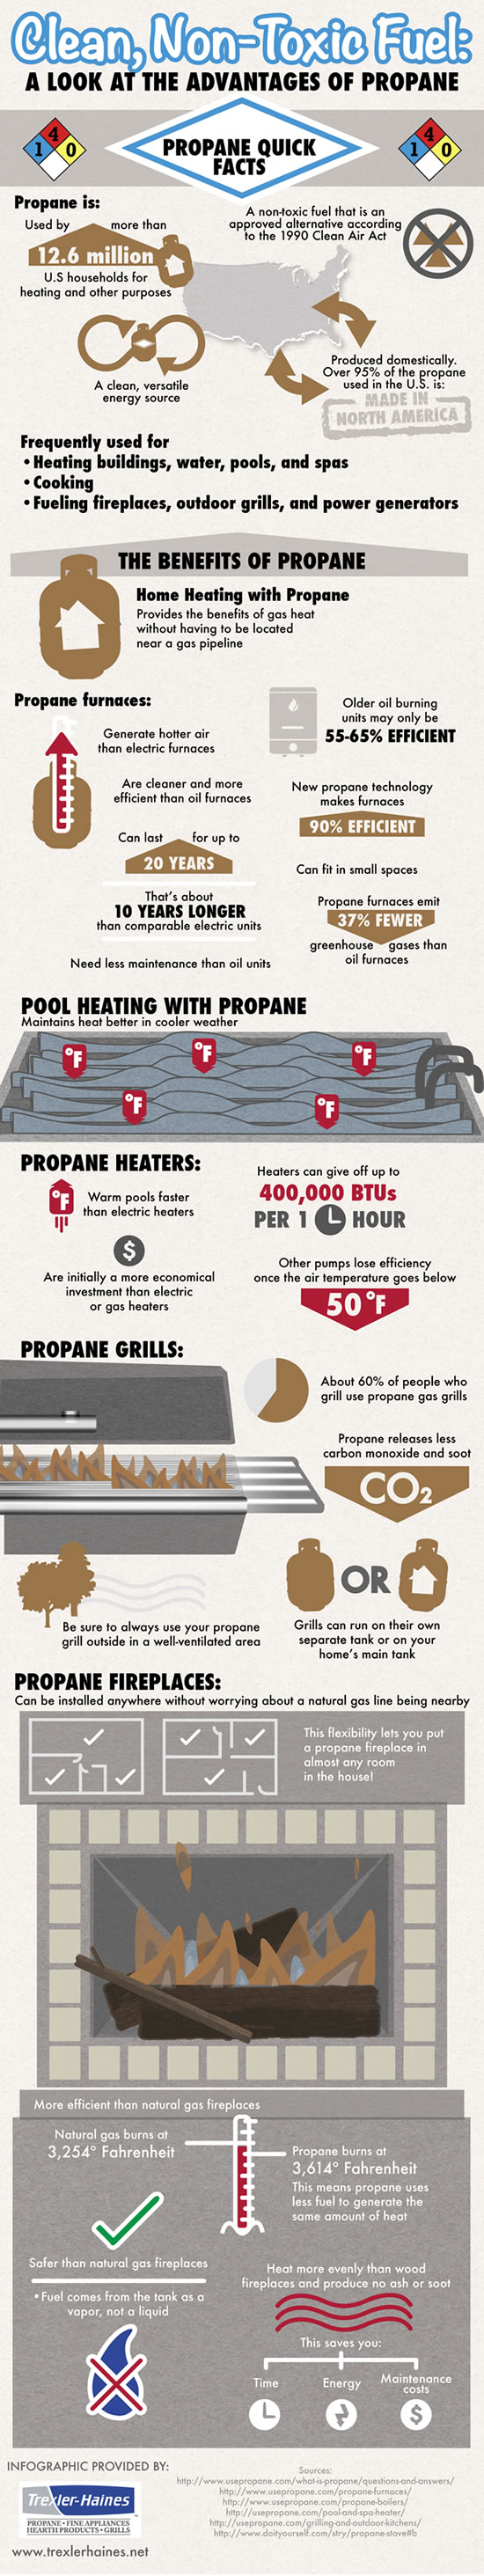 The Benefits of Propane Infographic